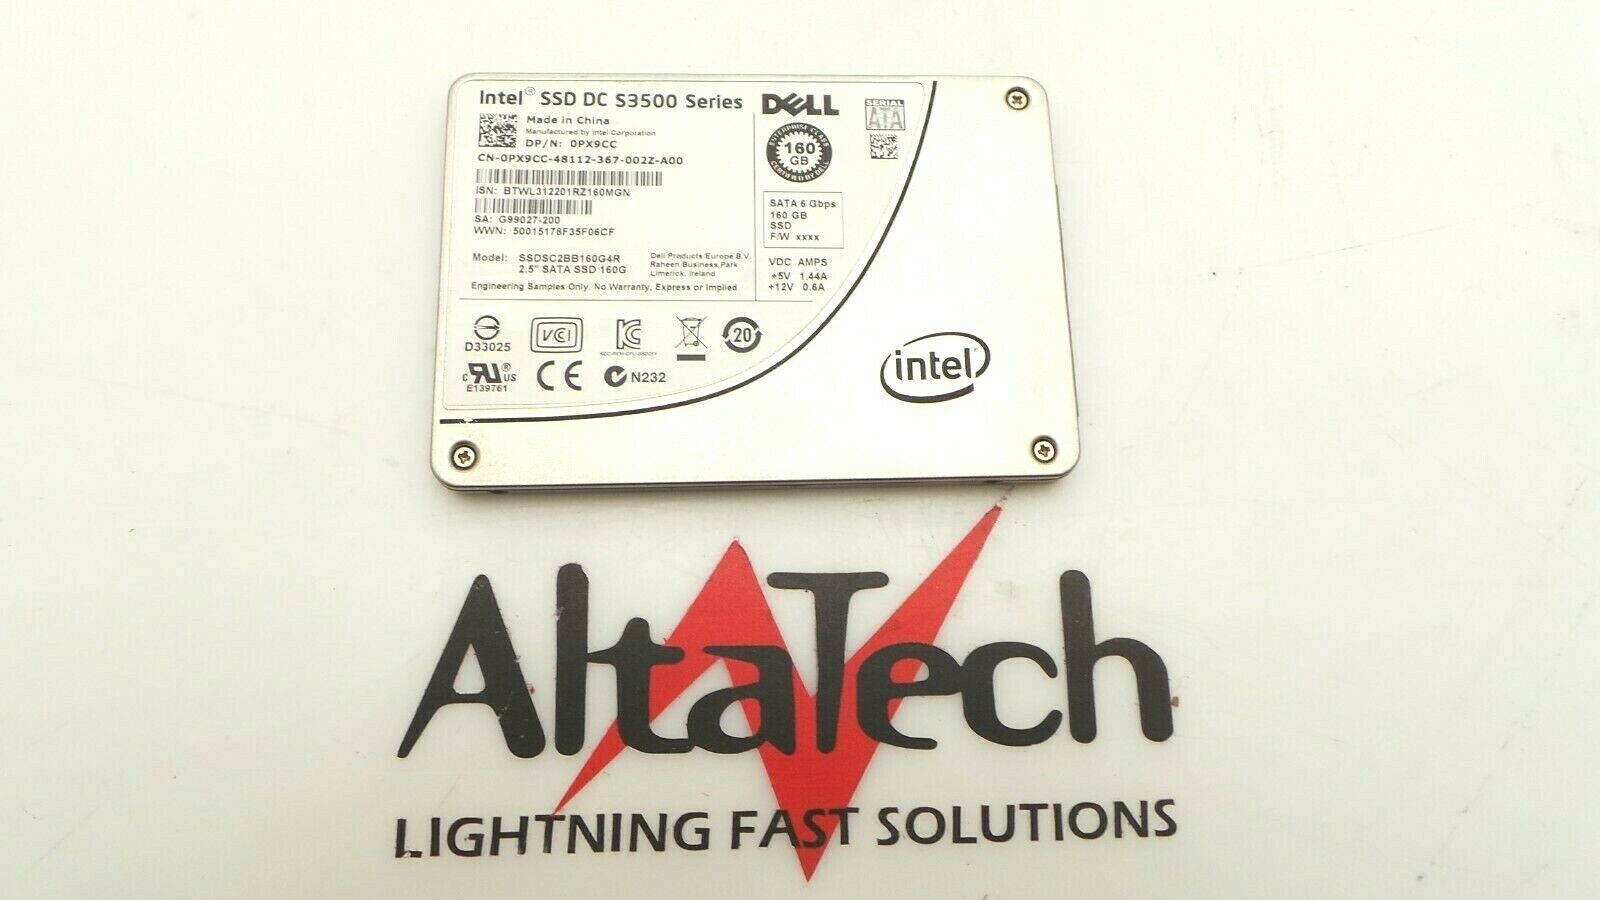 Intel SSDSC2BB160G4R Intel DC S3500 SSDSC2BB160G4R 160GB SSD SATA 2.5 6G Dell PX9CC Solid State Drive, Used